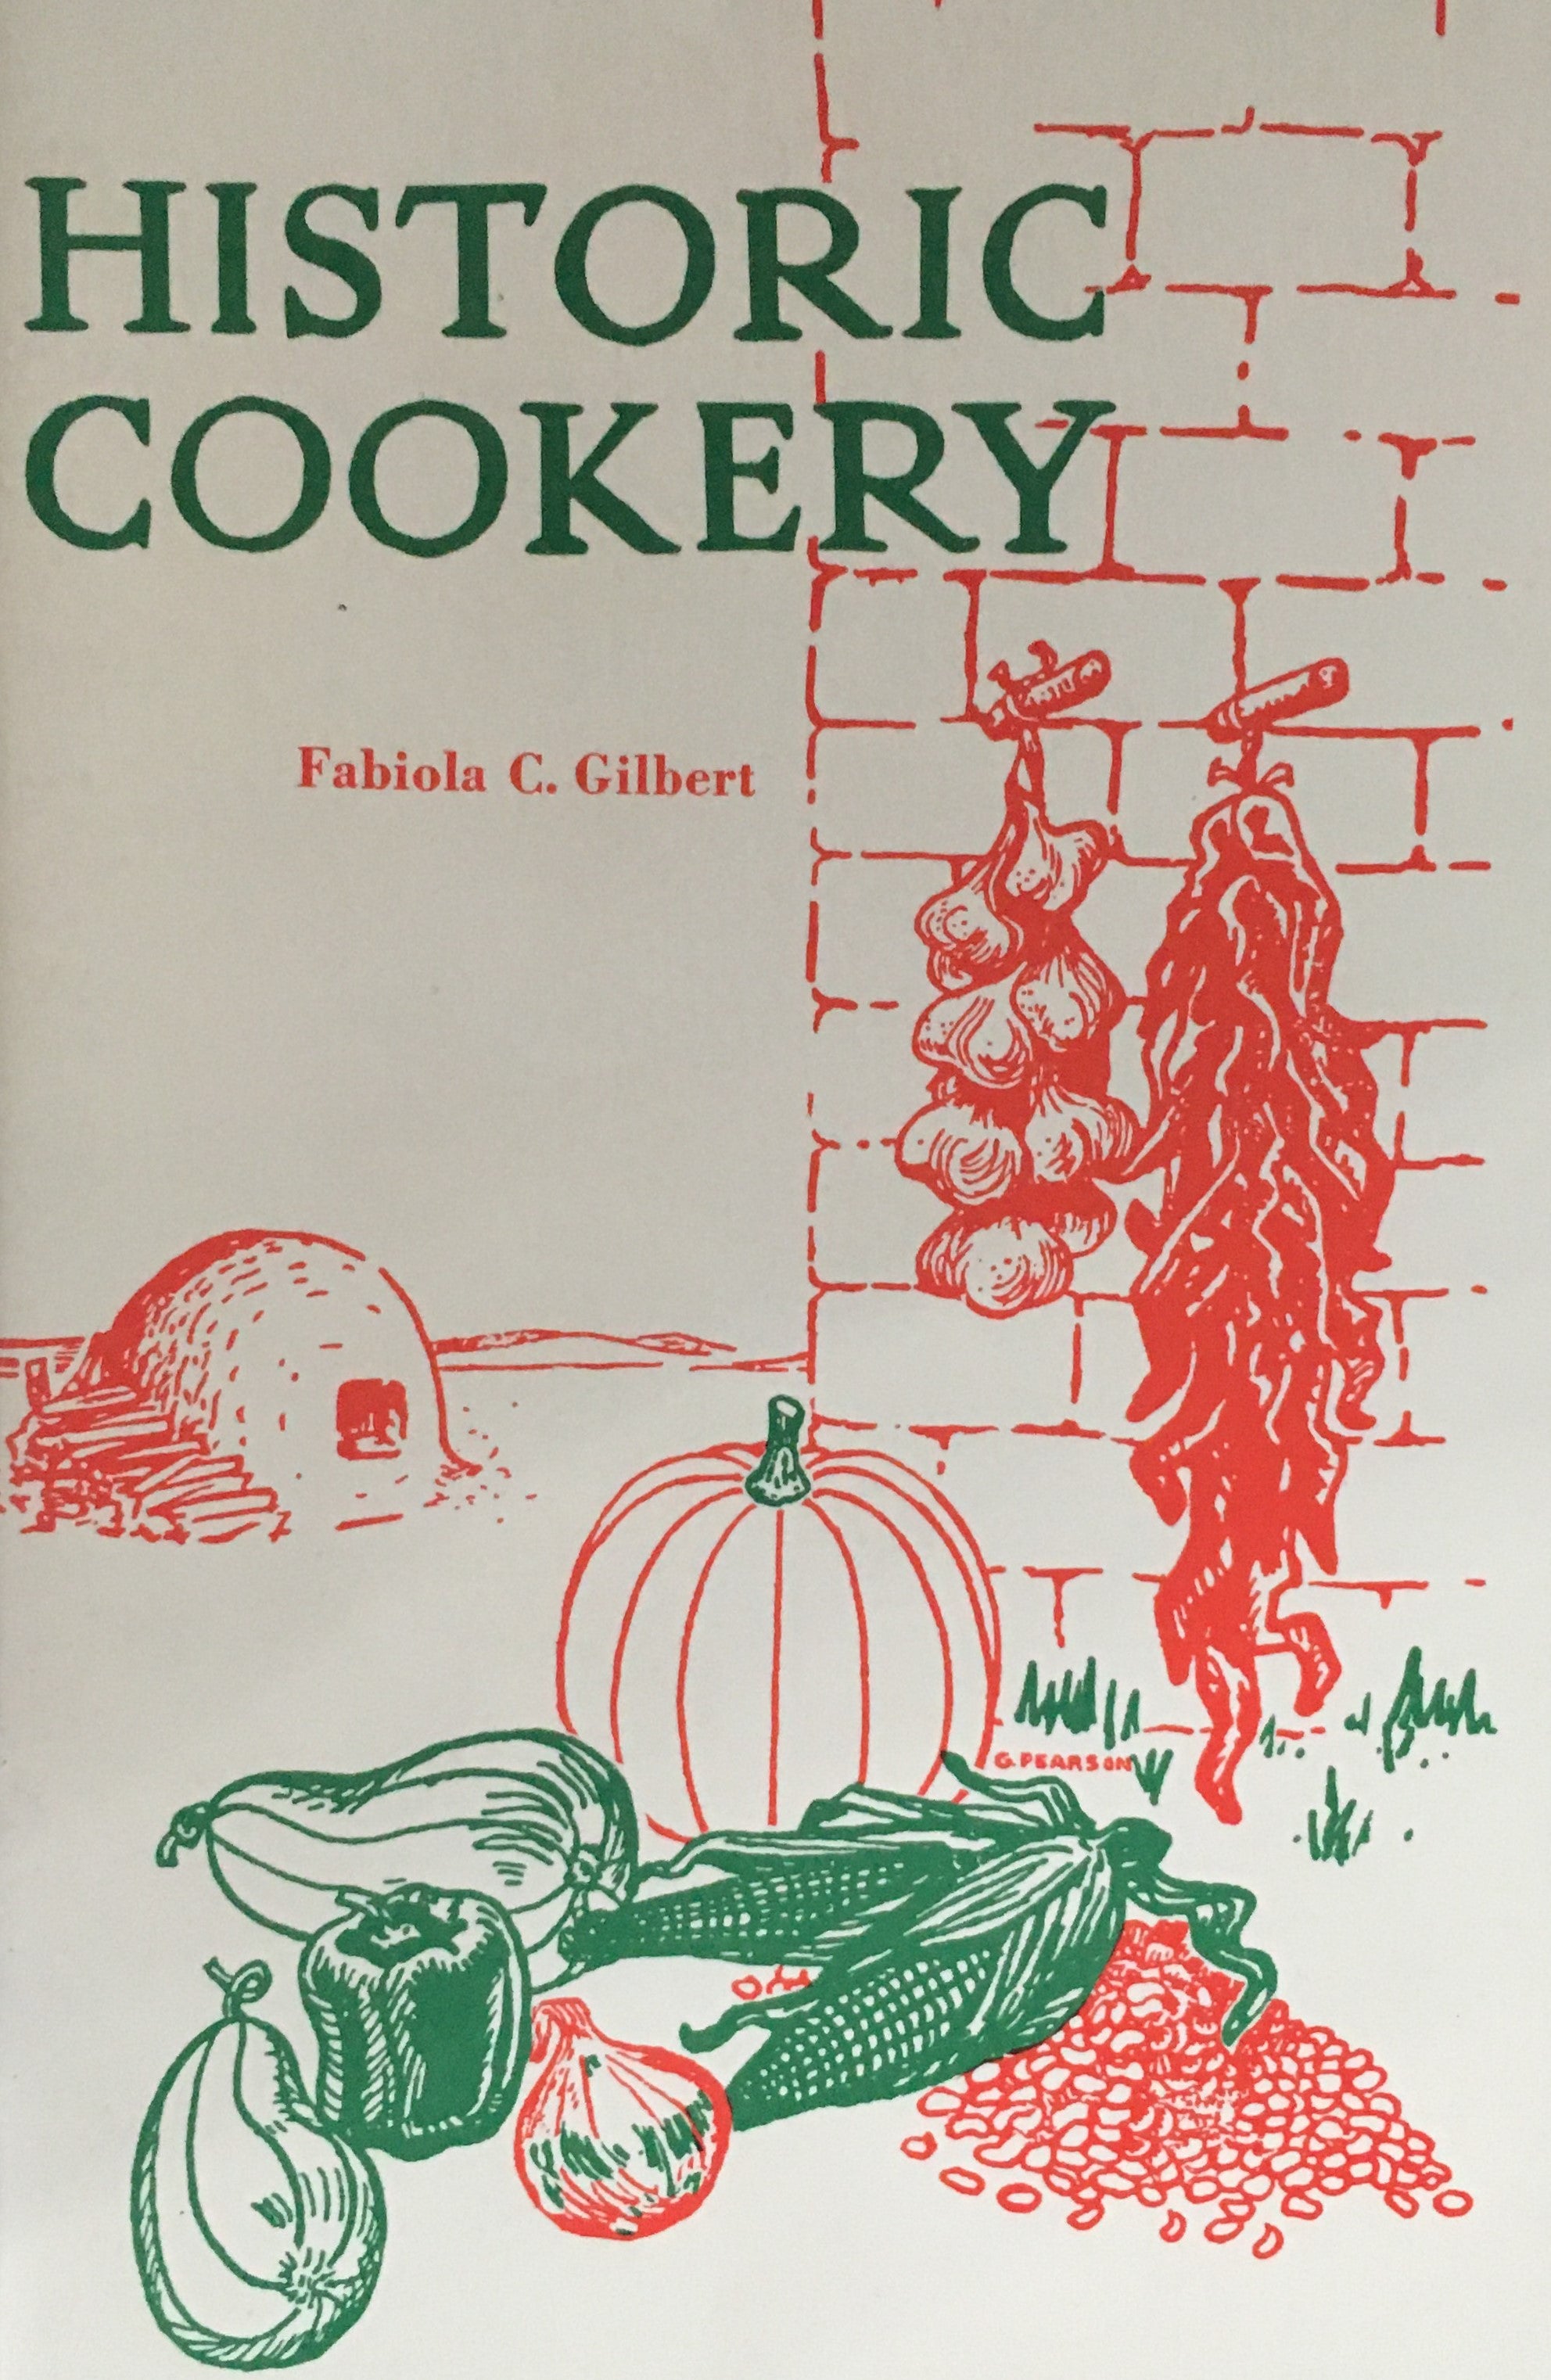 Historic Cookery by Faliola C. Gilbert Book Cover